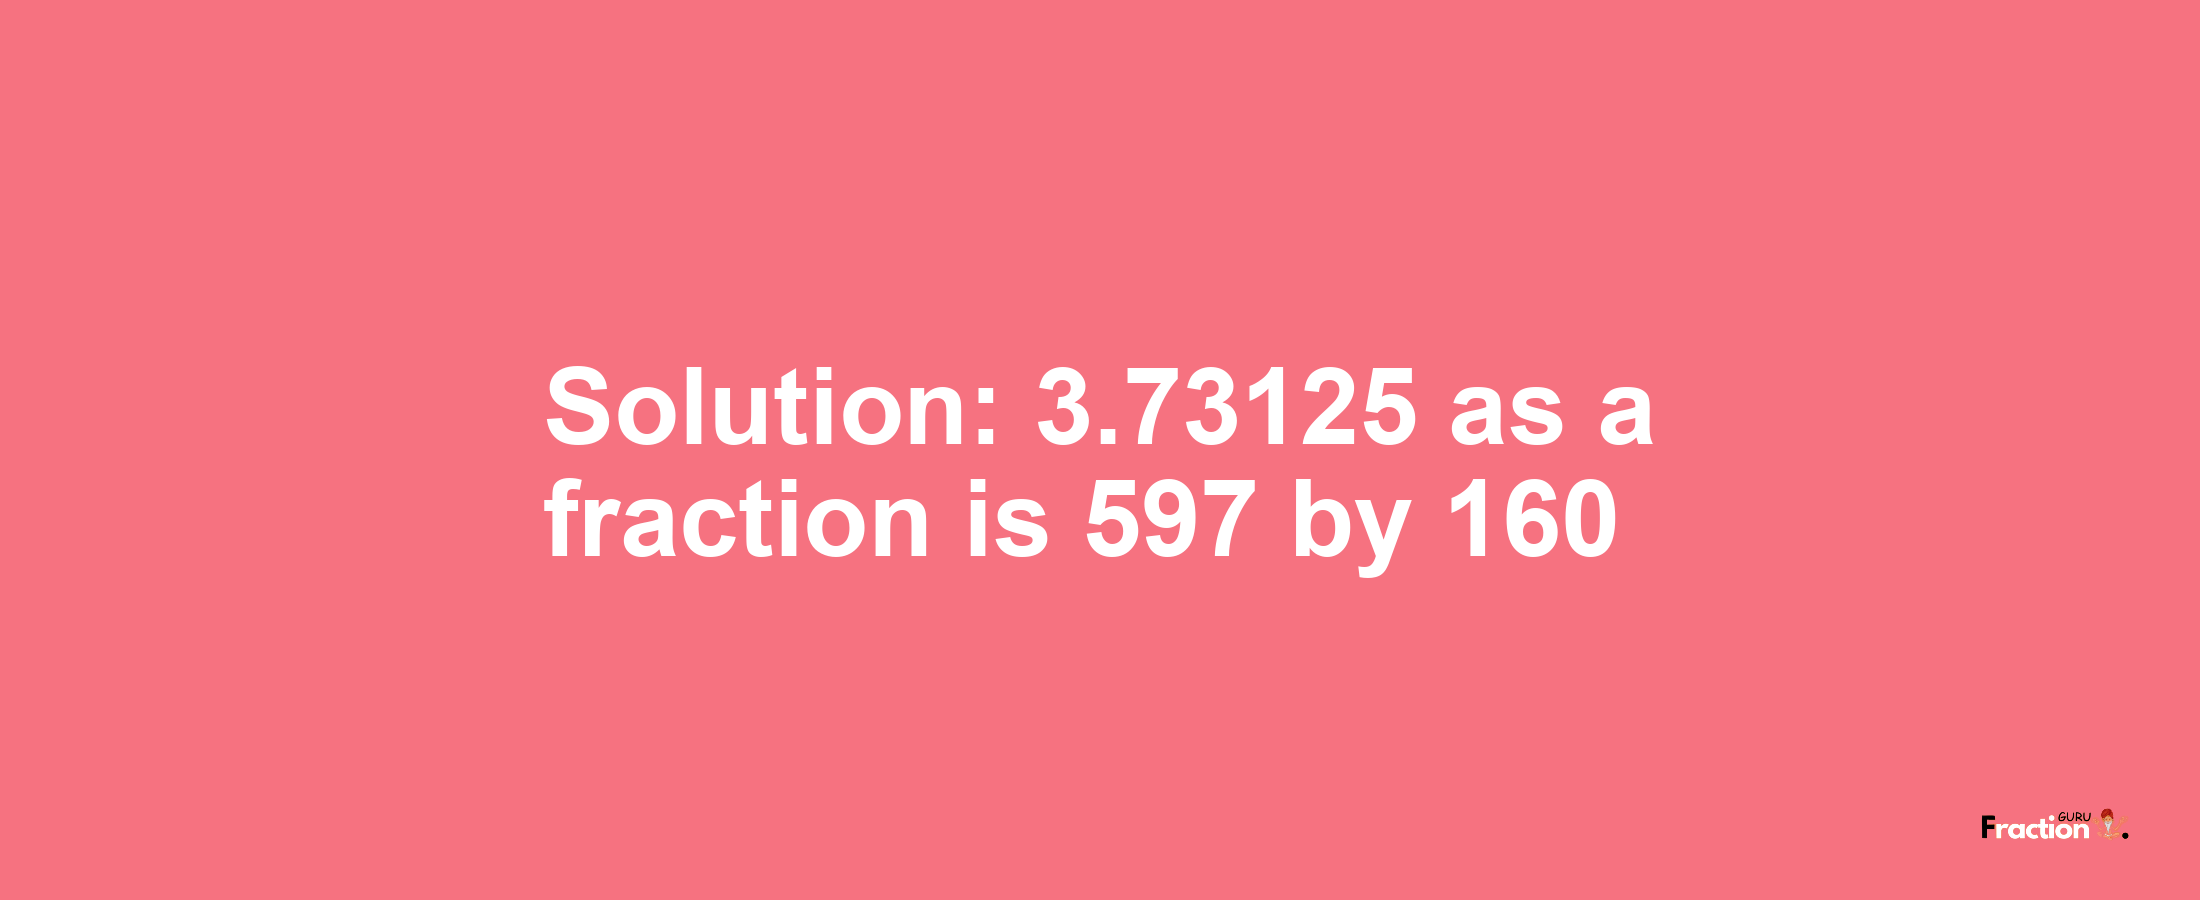 Solution:3.73125 as a fraction is 597/160